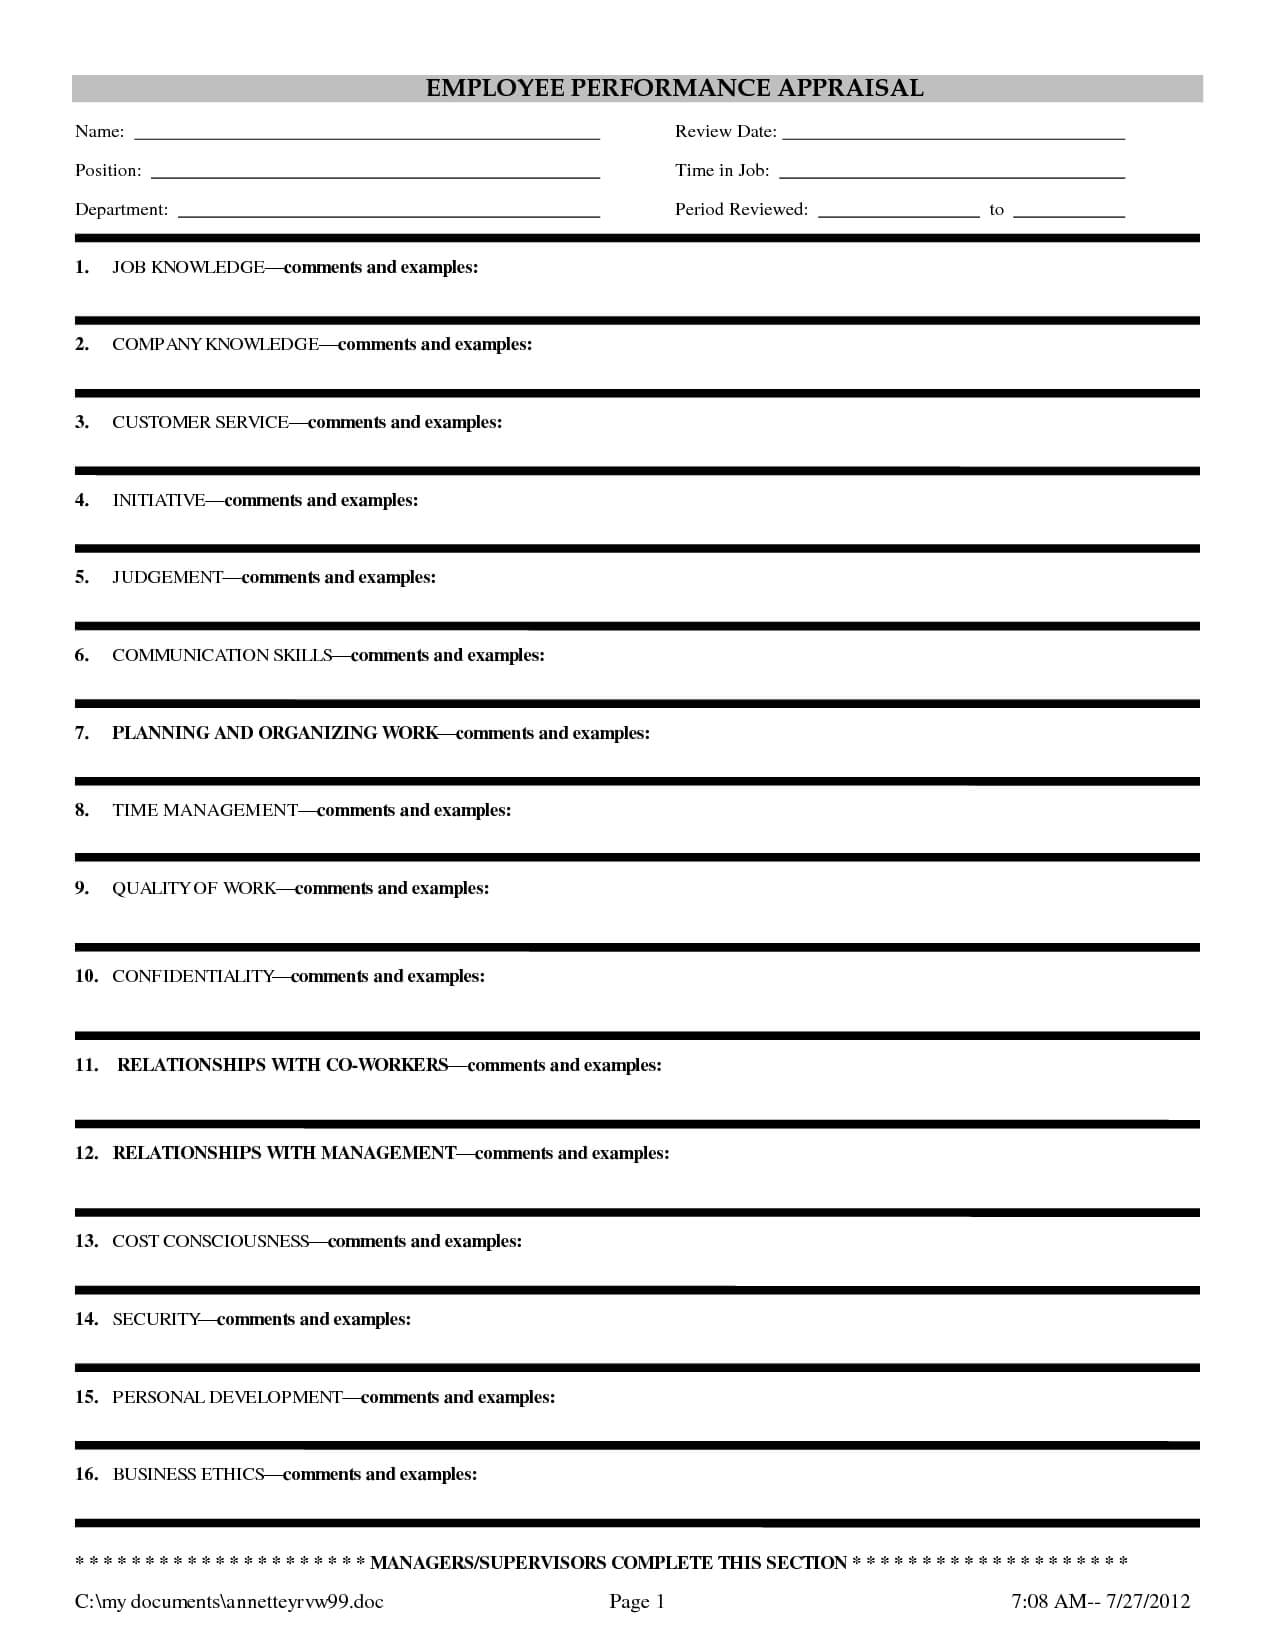 23 Images Of Evaluation Outline Template Blank | Masorler For Blank Evaluation Form Template